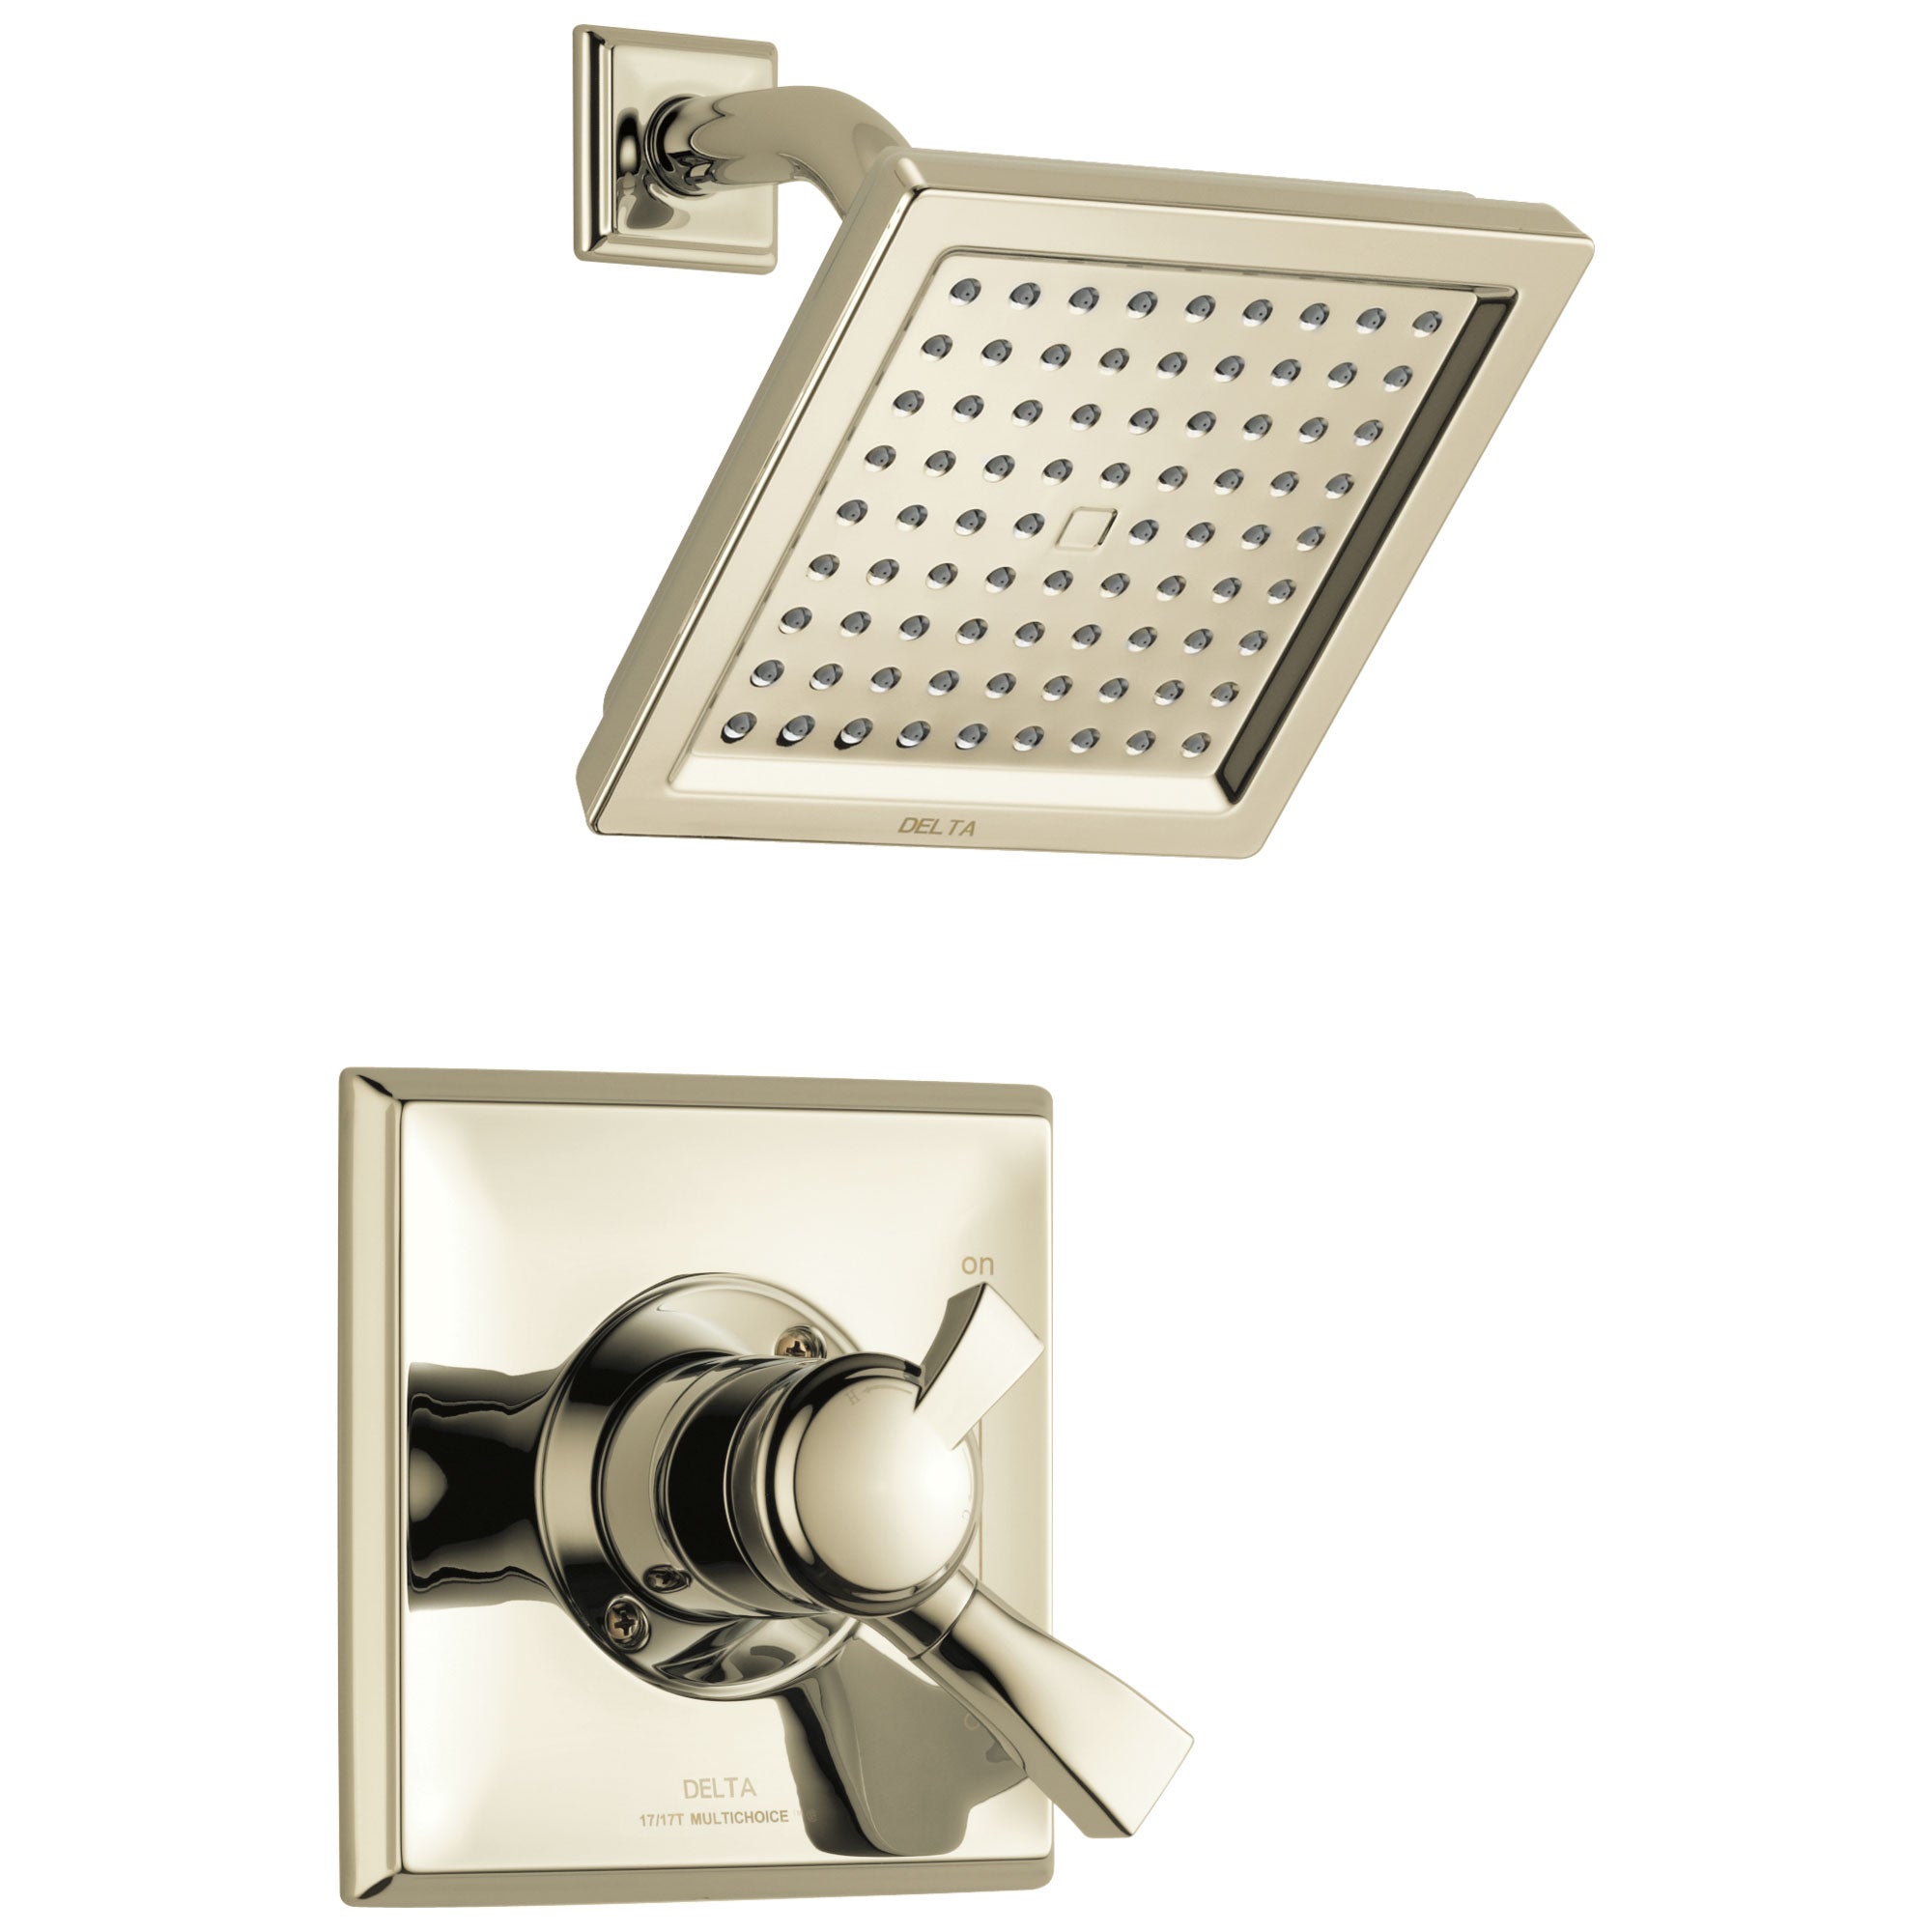 Delta Dryden Polished Nickel Finish Monitor 17 Series Water Efficient Shower only Faucet Includes Handles, Cartridge, and Valve without Stops D3389V